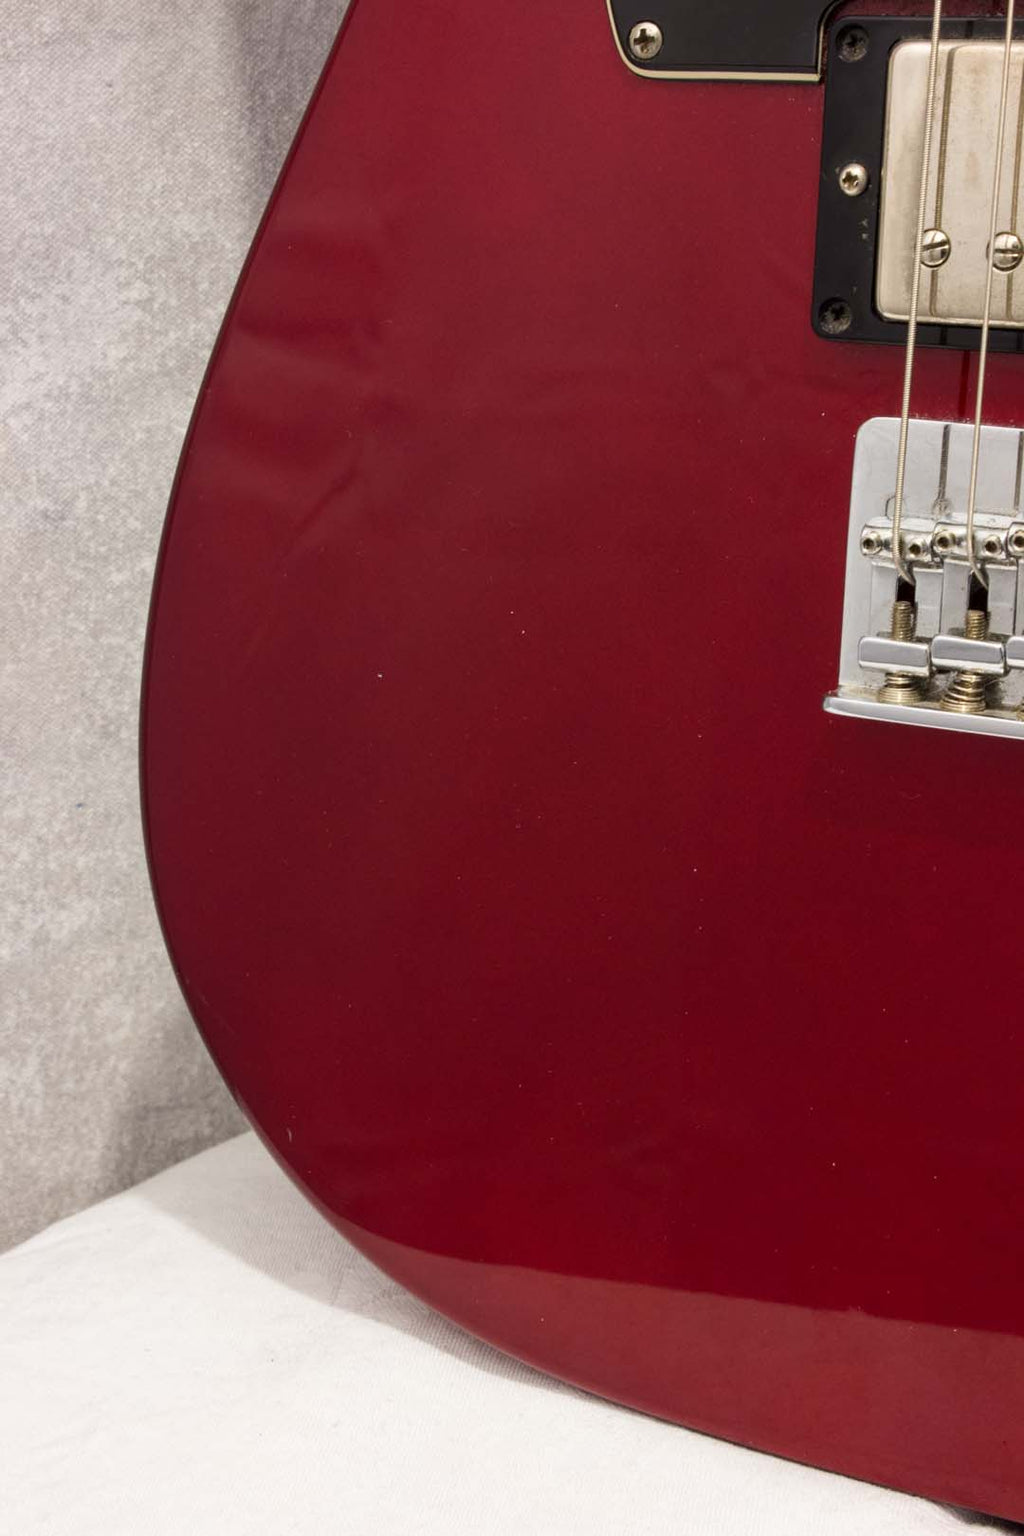 Fender Standard Telecaster HH Candy Apple Red 2010